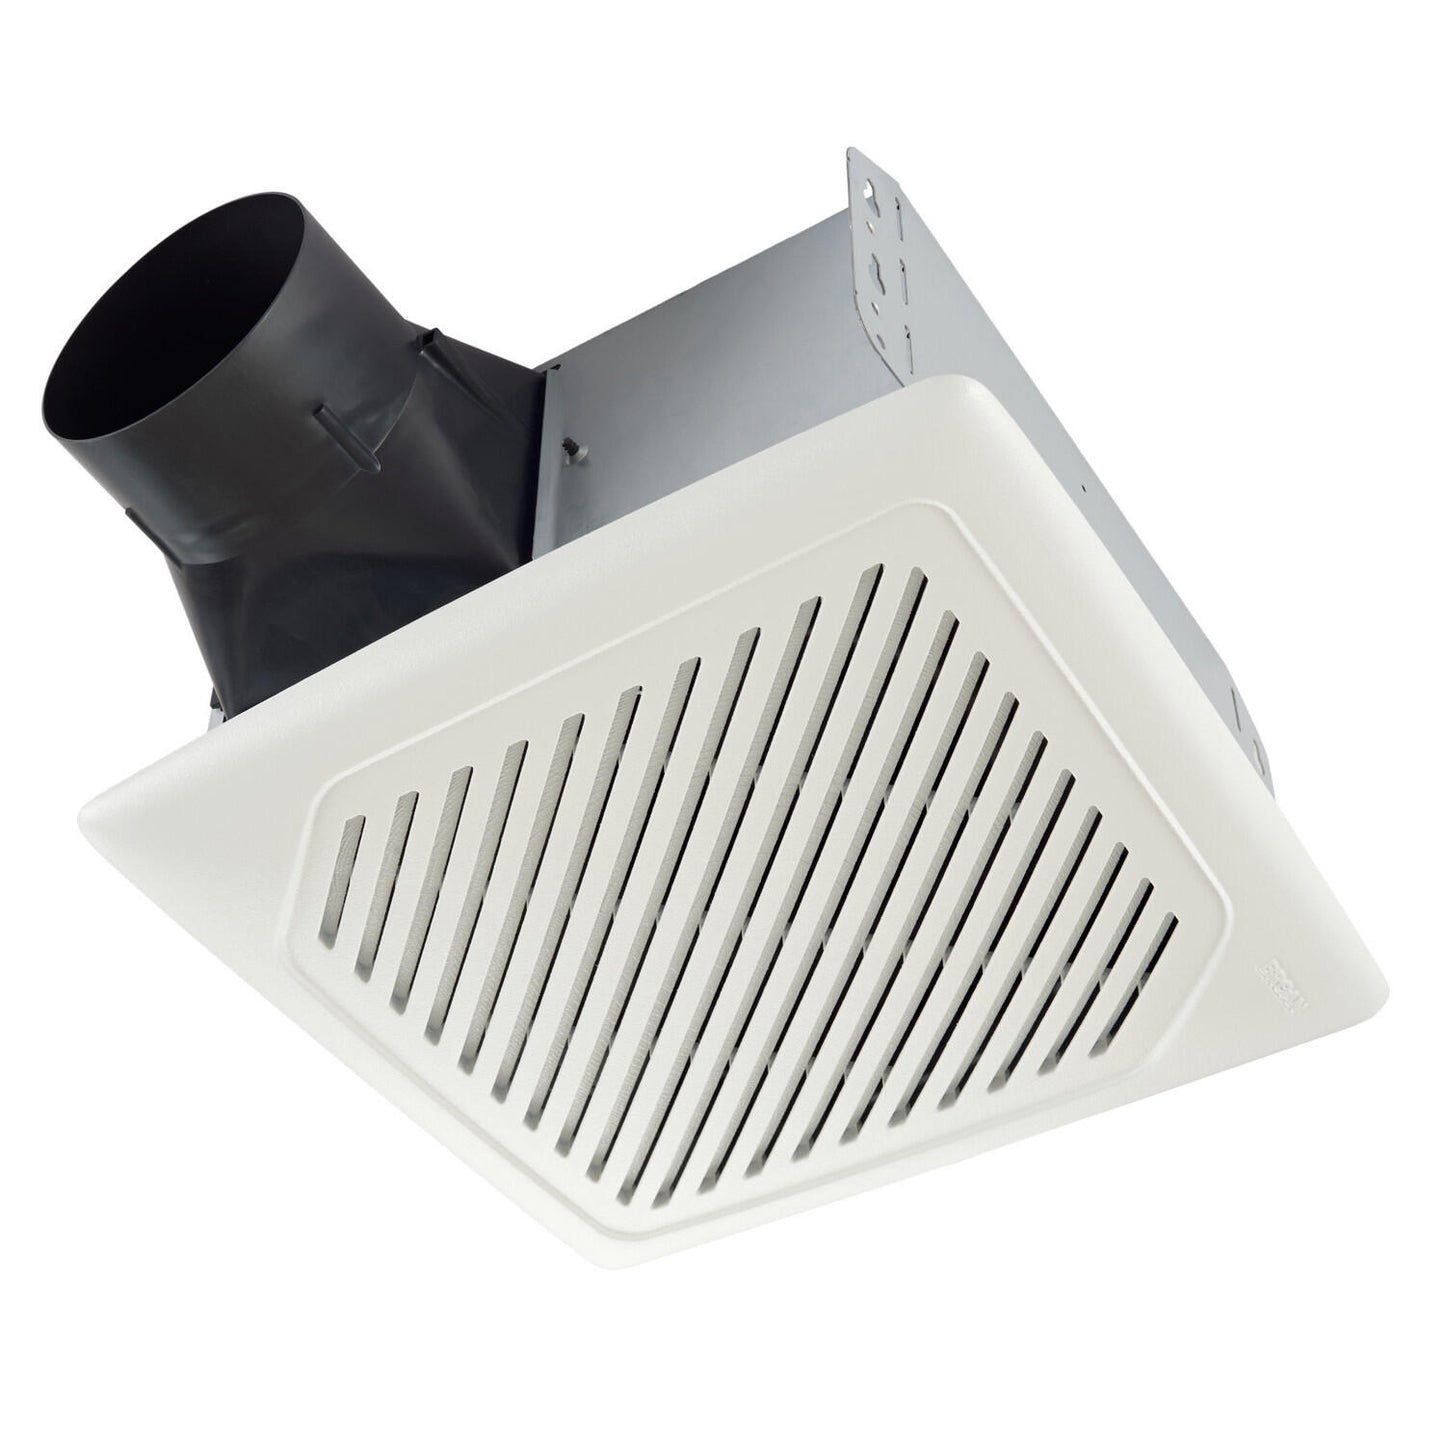 Broan AEW110 Broan-Nutone® Wall Vent Kit, 3" Or 4" Round Duct